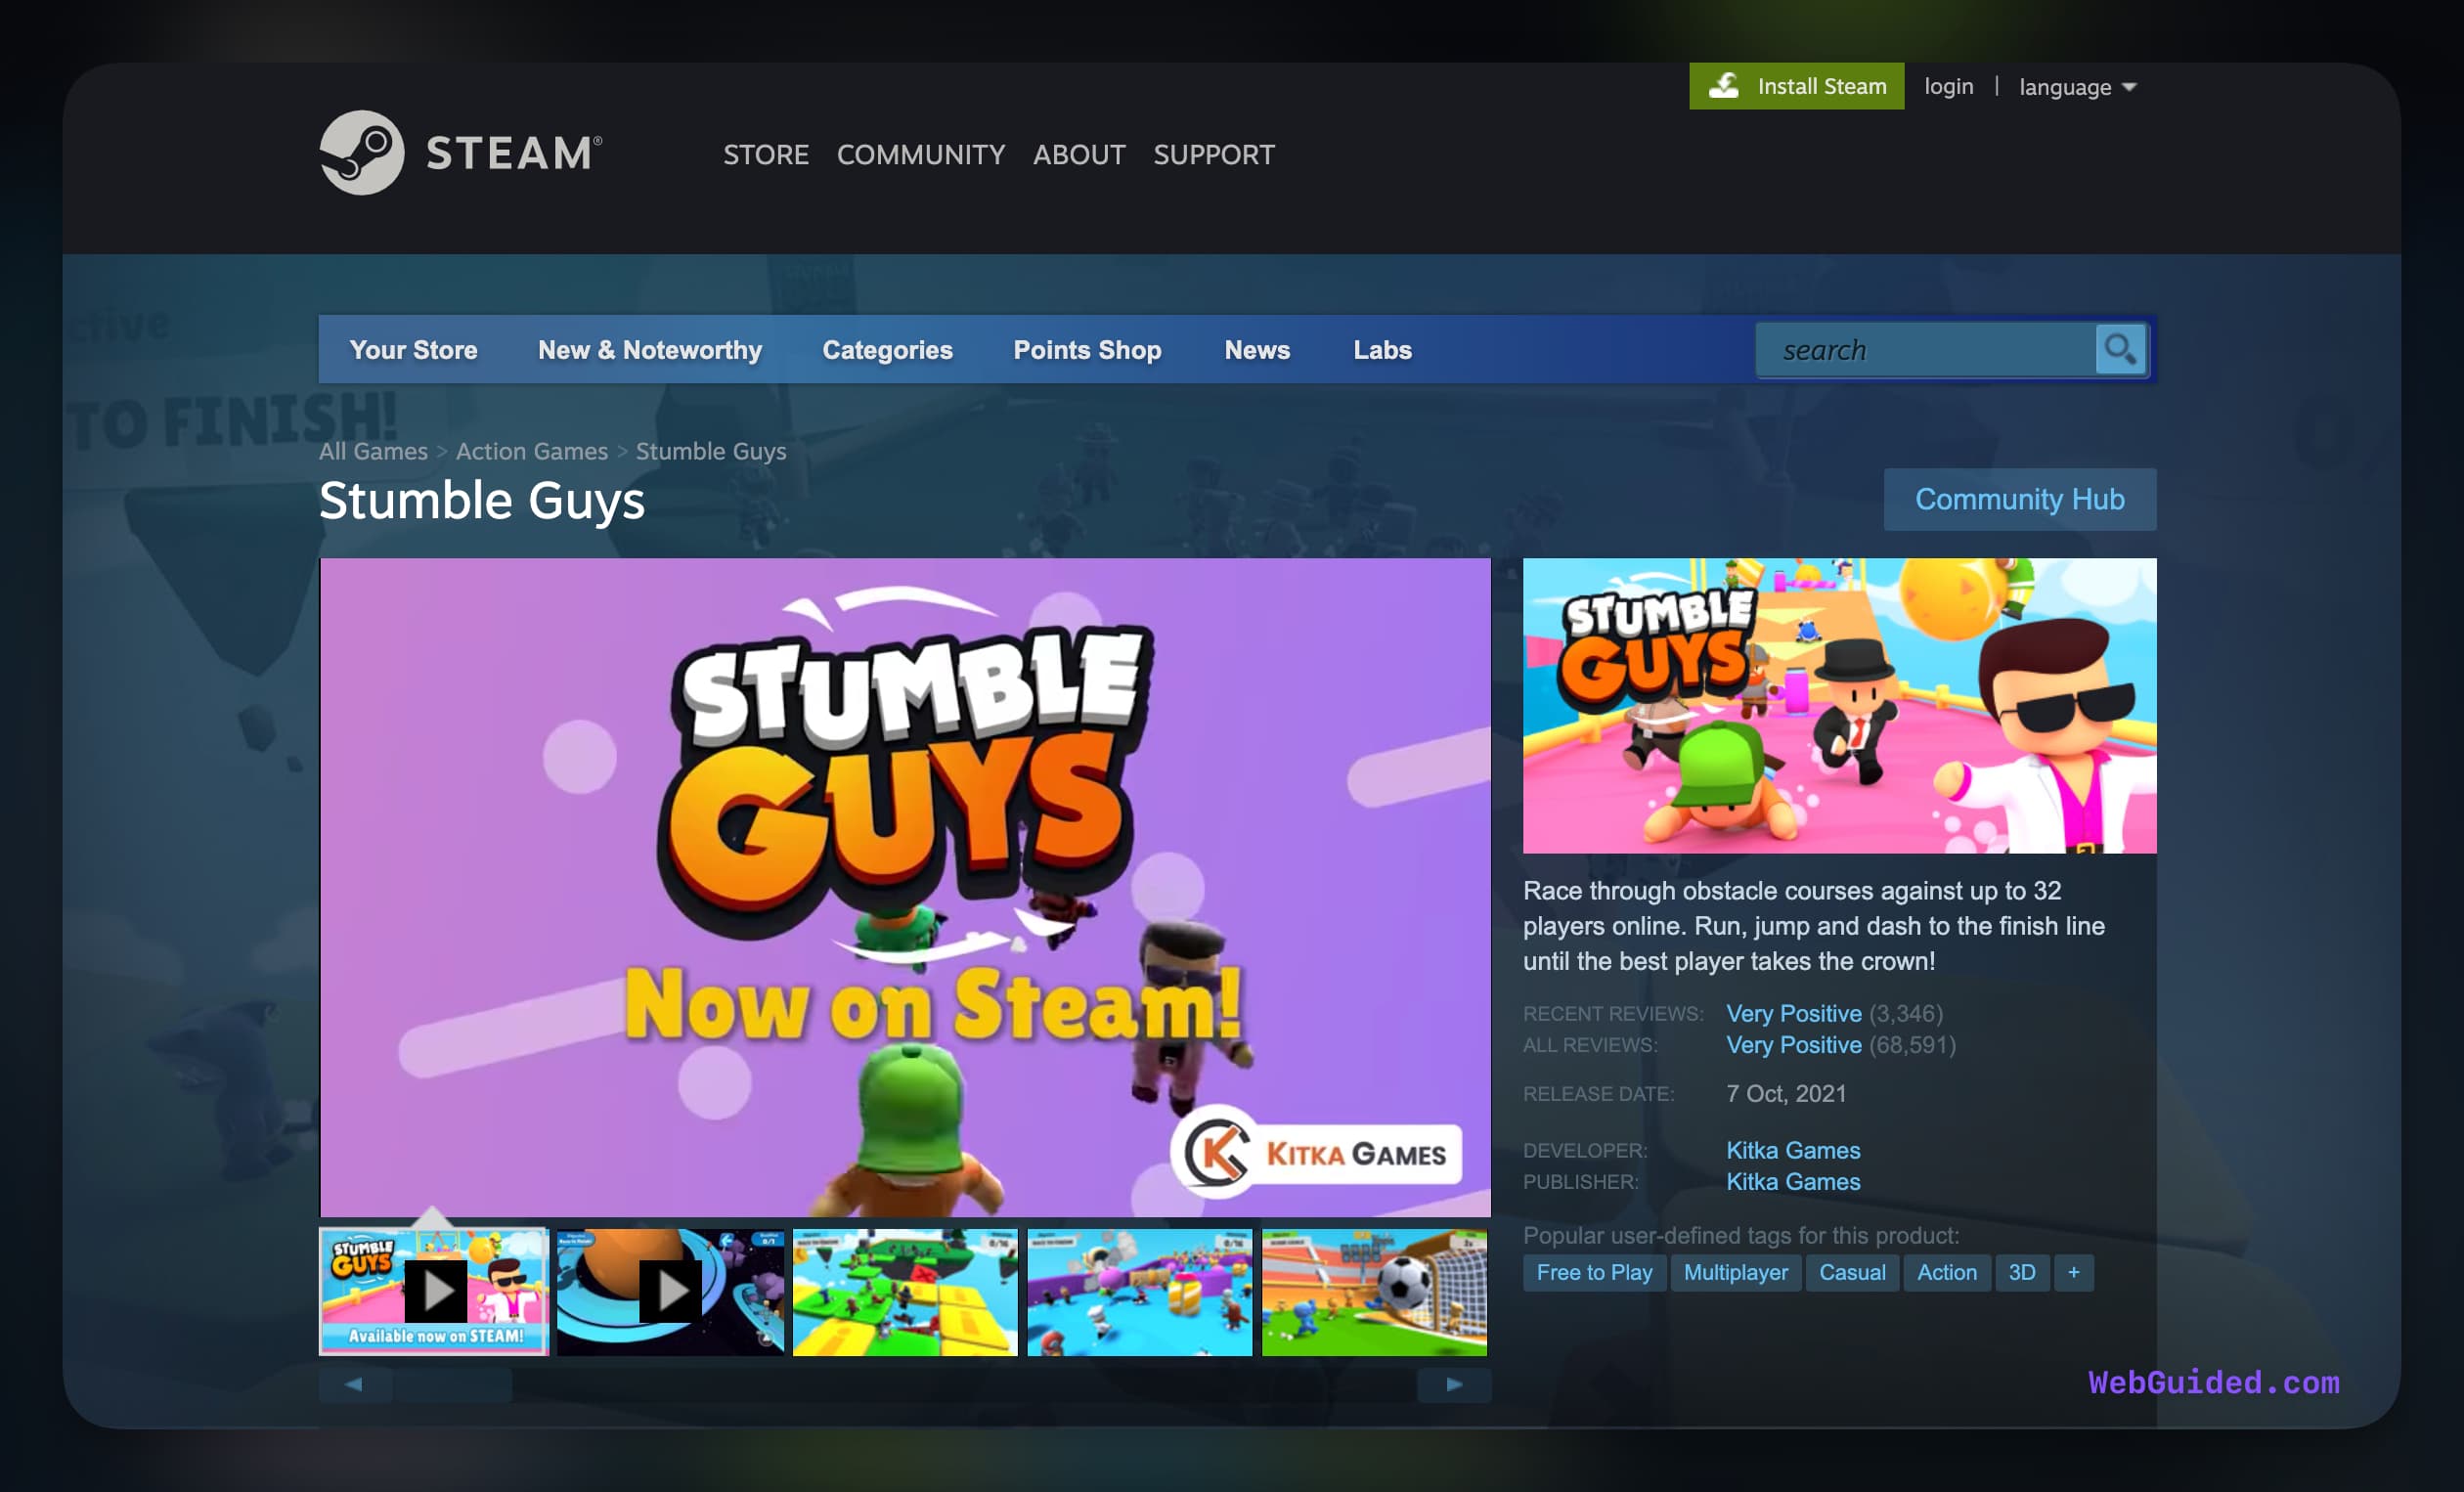 Stumble Guys release came out on Steam Preview